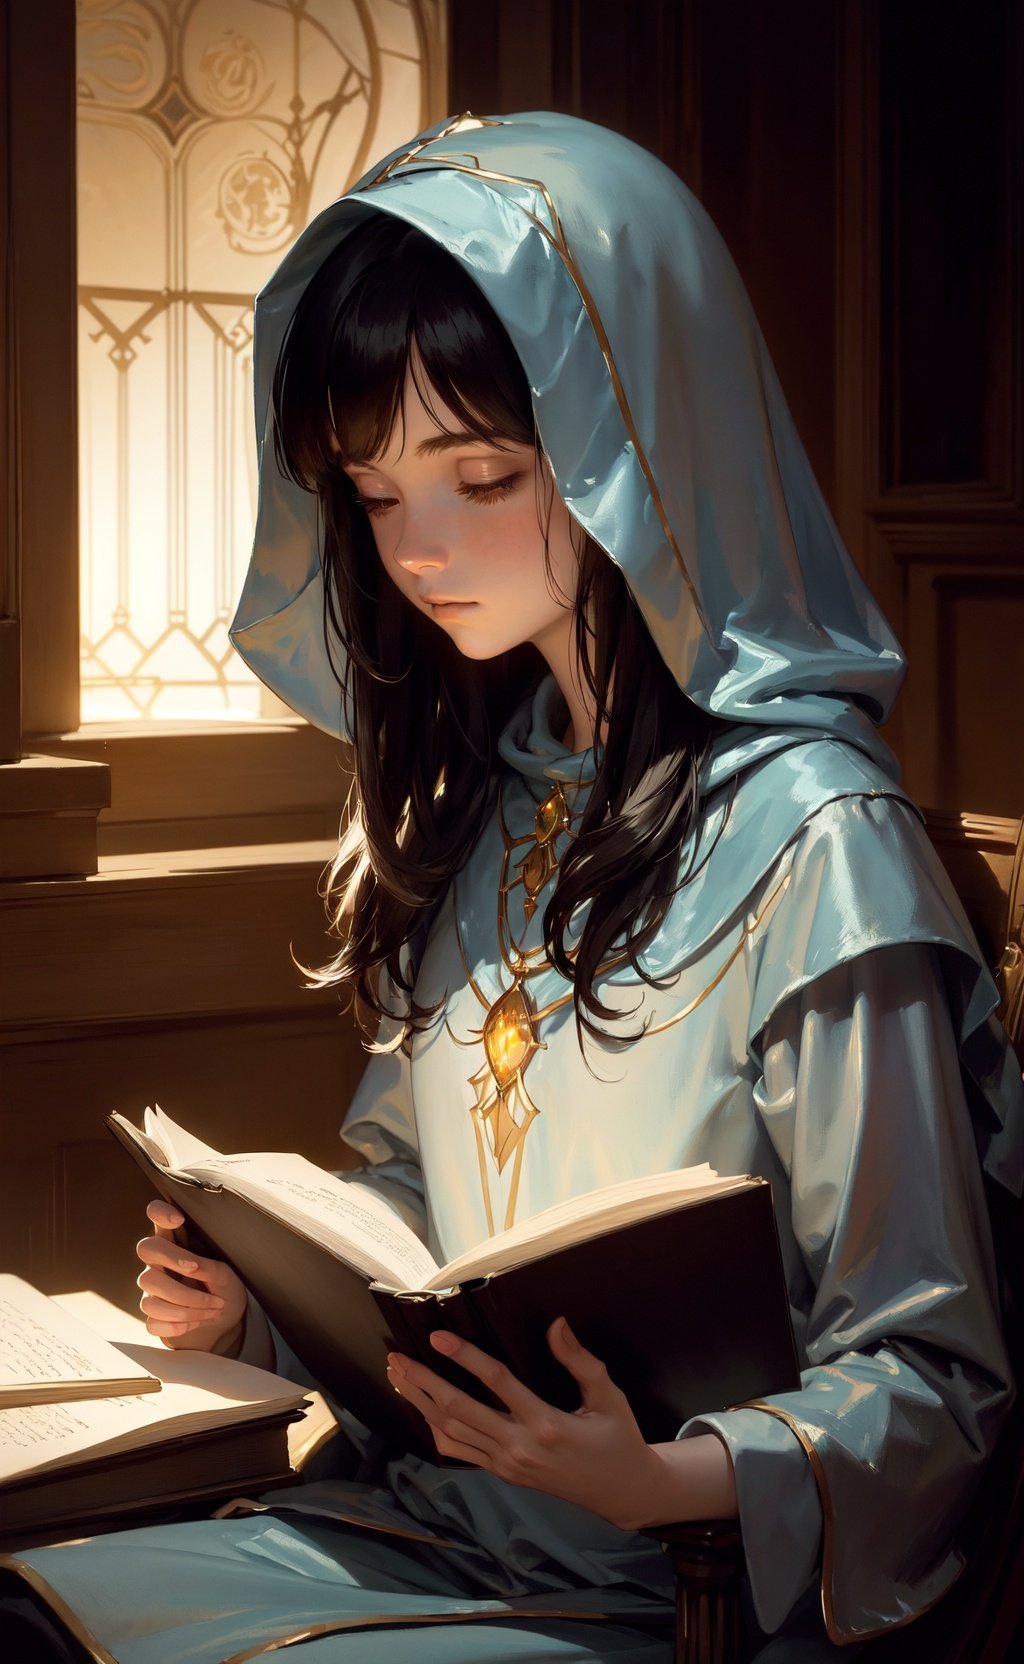 masterpiece, best quality, John Singer Sargent, young sorceress studying, hood up, moody lighting, tranquil, calm, glow, glowing, mystical, magical, rim lighting